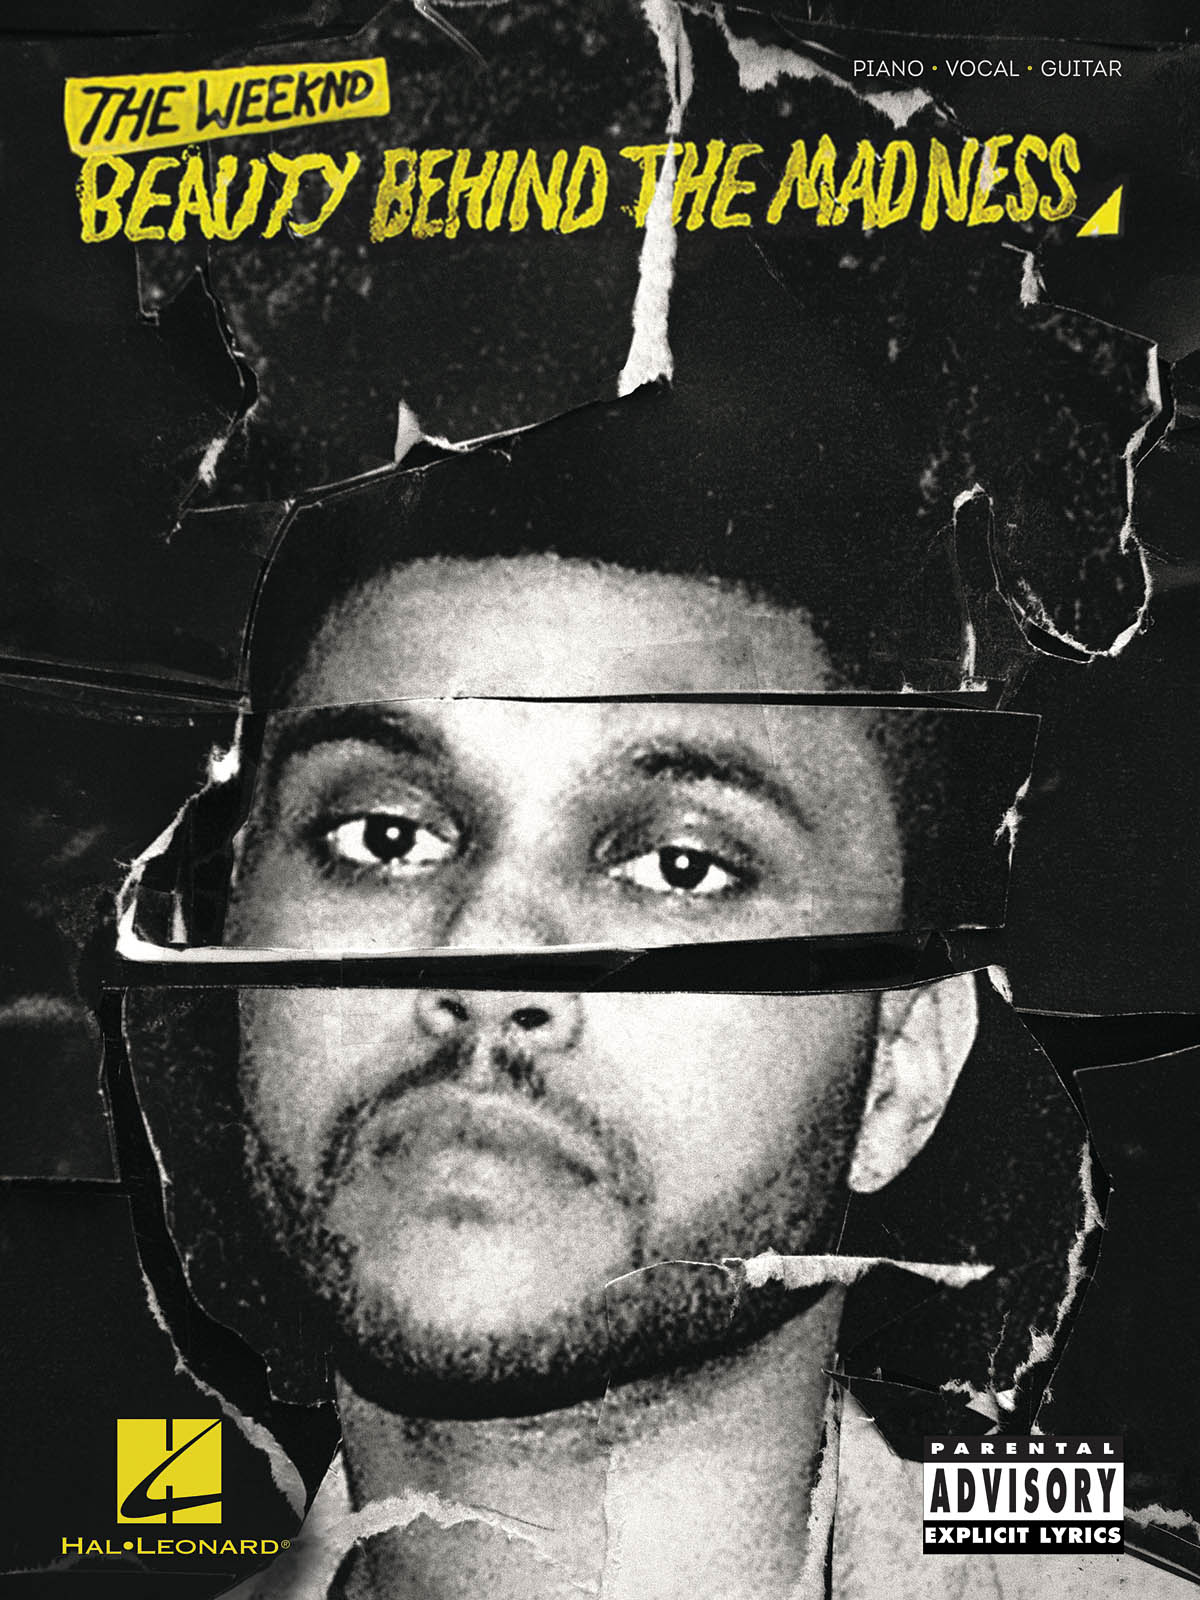 The Weeknd: Beauty Behind The Madness